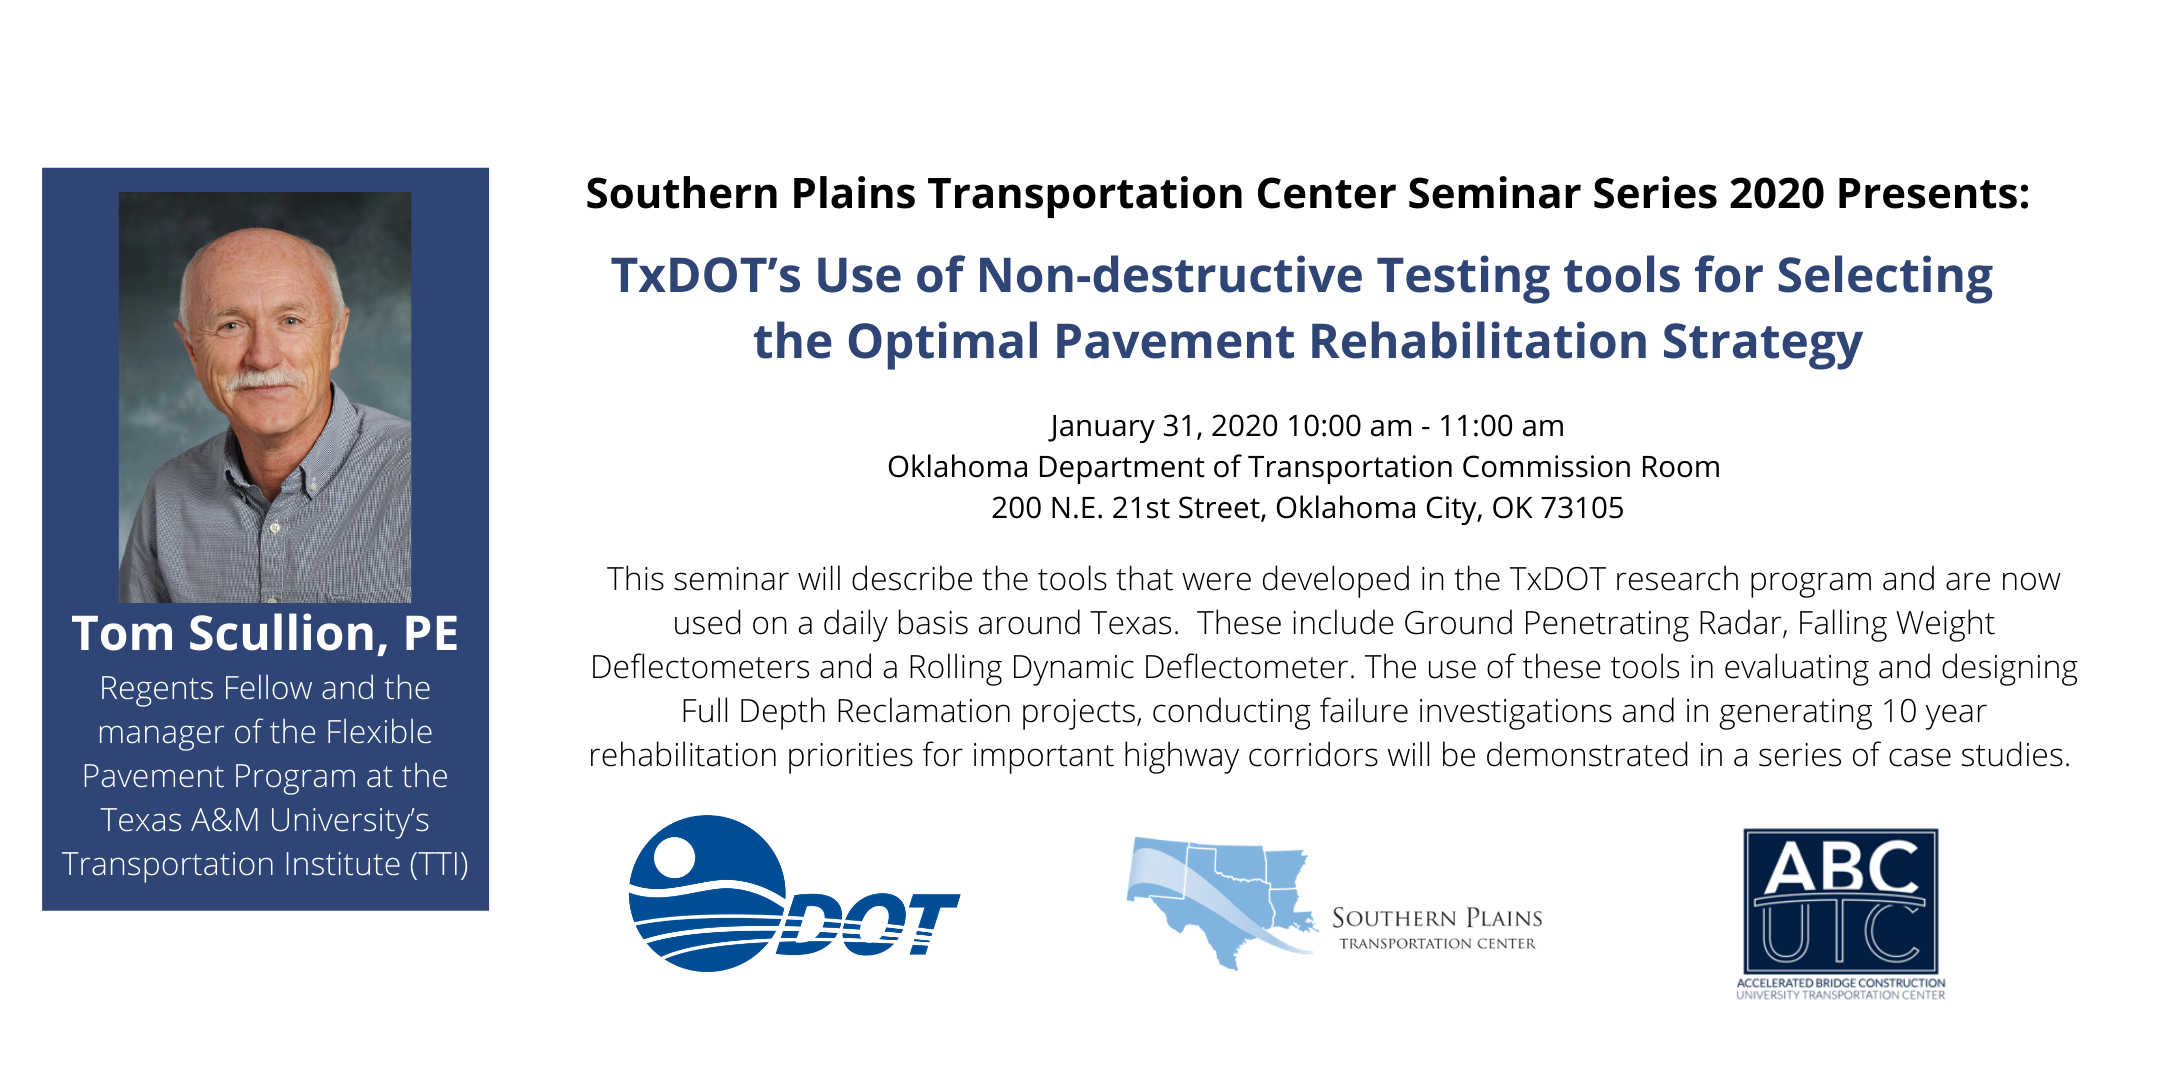 TxDOT’s Use of Non-destructive Testing tools for Selecting the Optimal Pavement Rehabilitation Strategy